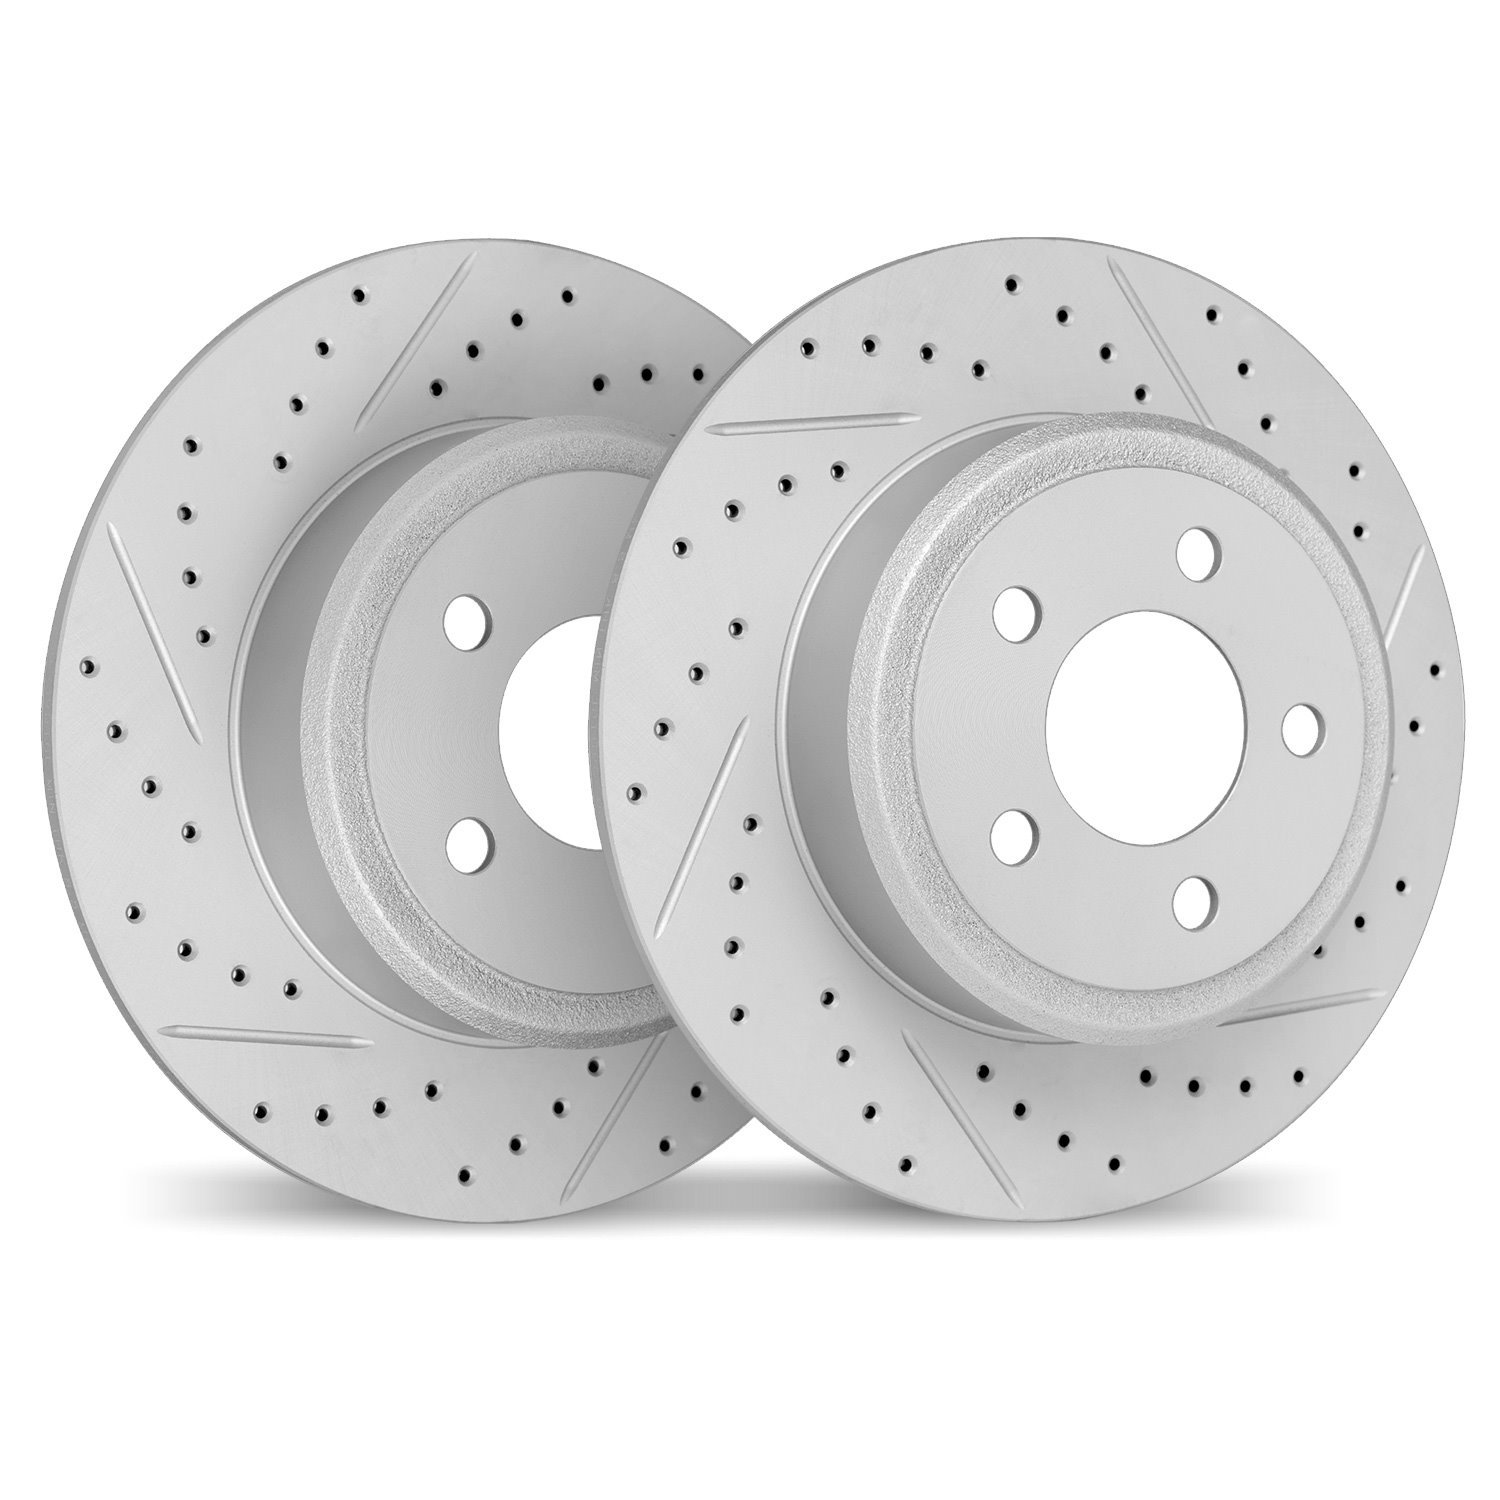 2002-55004 Geoperformance Drilled/Slotted Brake Rotors, 2003-2005 Ford/Lincoln/Mercury/Mazda, Position: Rear